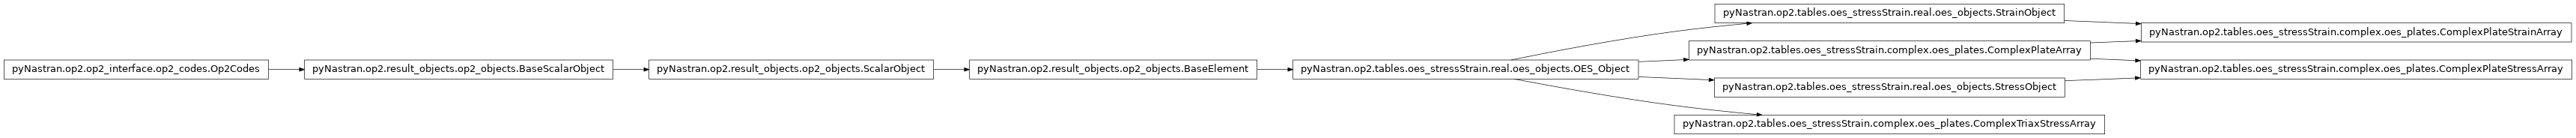 Inheritance diagram of pyNastran.op2.tables.oes_stressStrain.complex.oes_plates